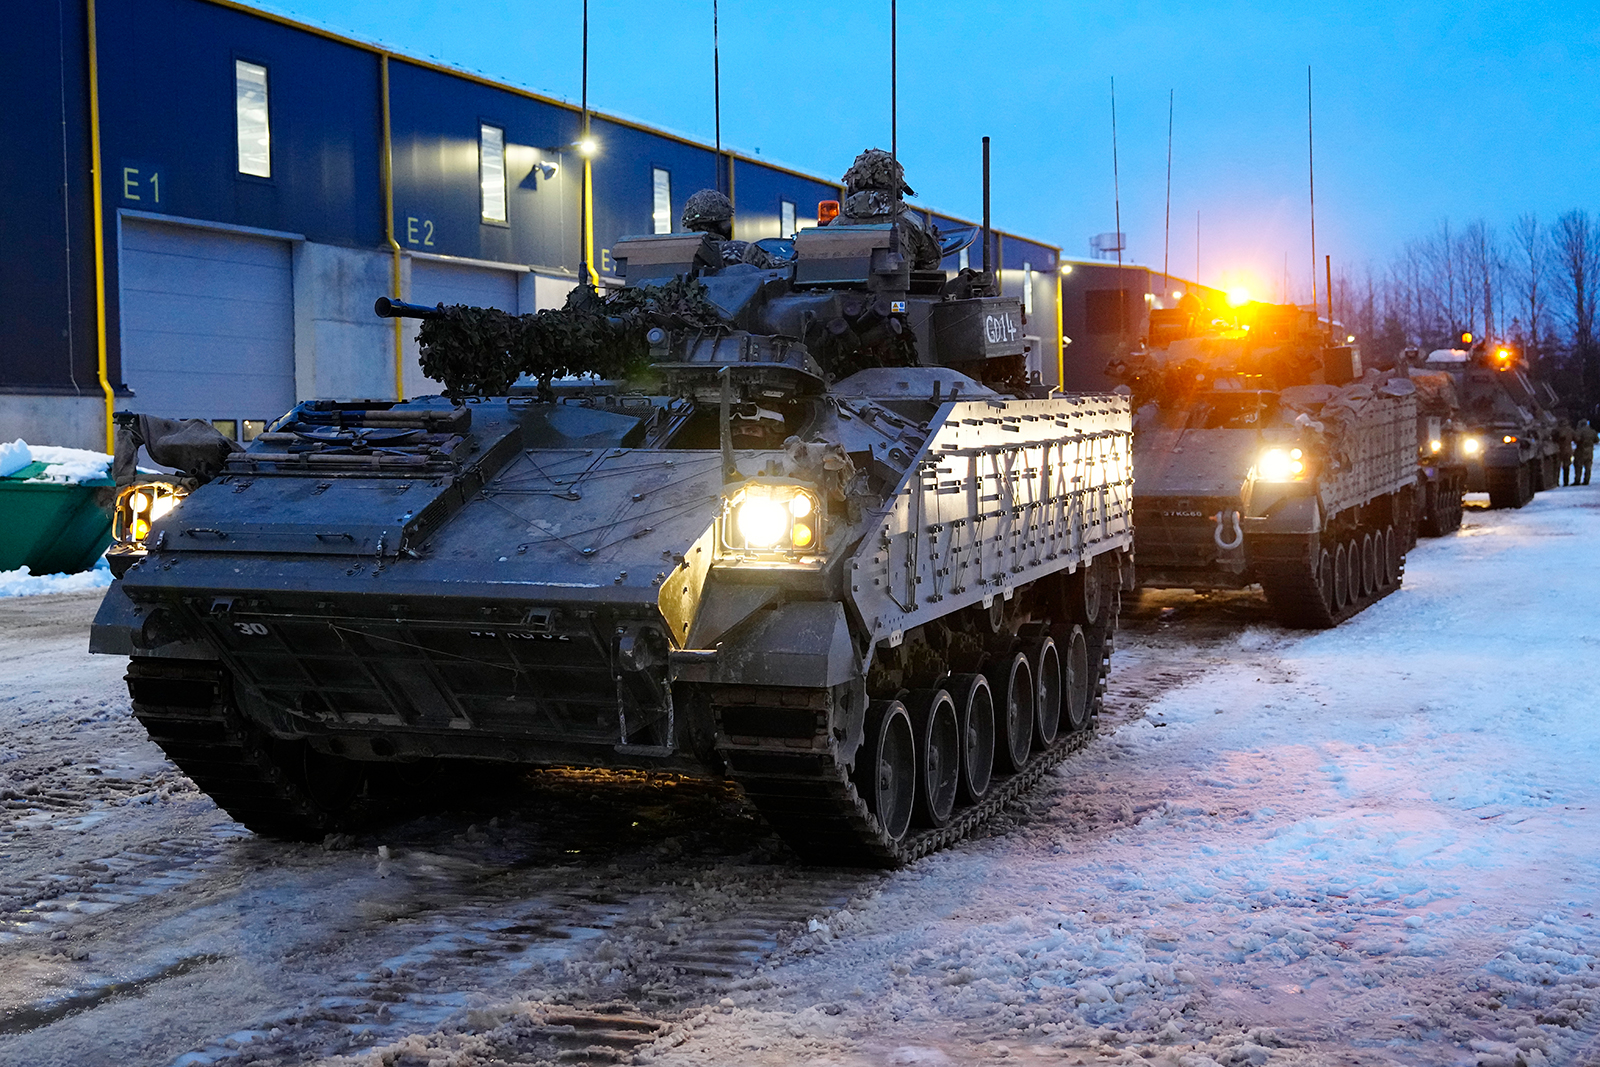 British armored vehicles prepare to move at the Tapa military camp in Estonia on January 19.